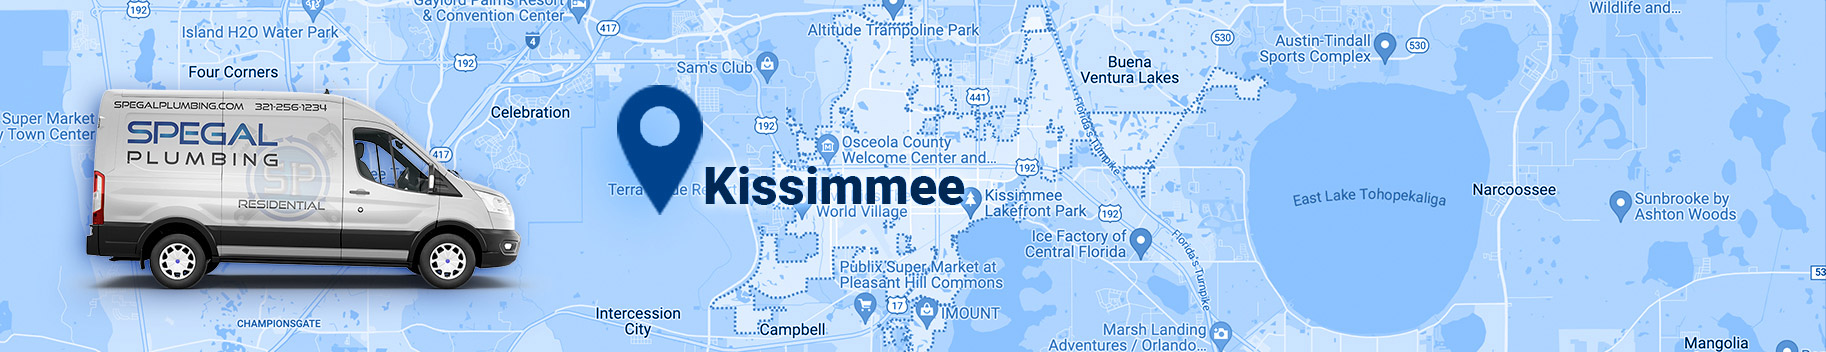 kissimmee plumber, service car with logo of Spegal Plumbing, and map showing Kissimmee